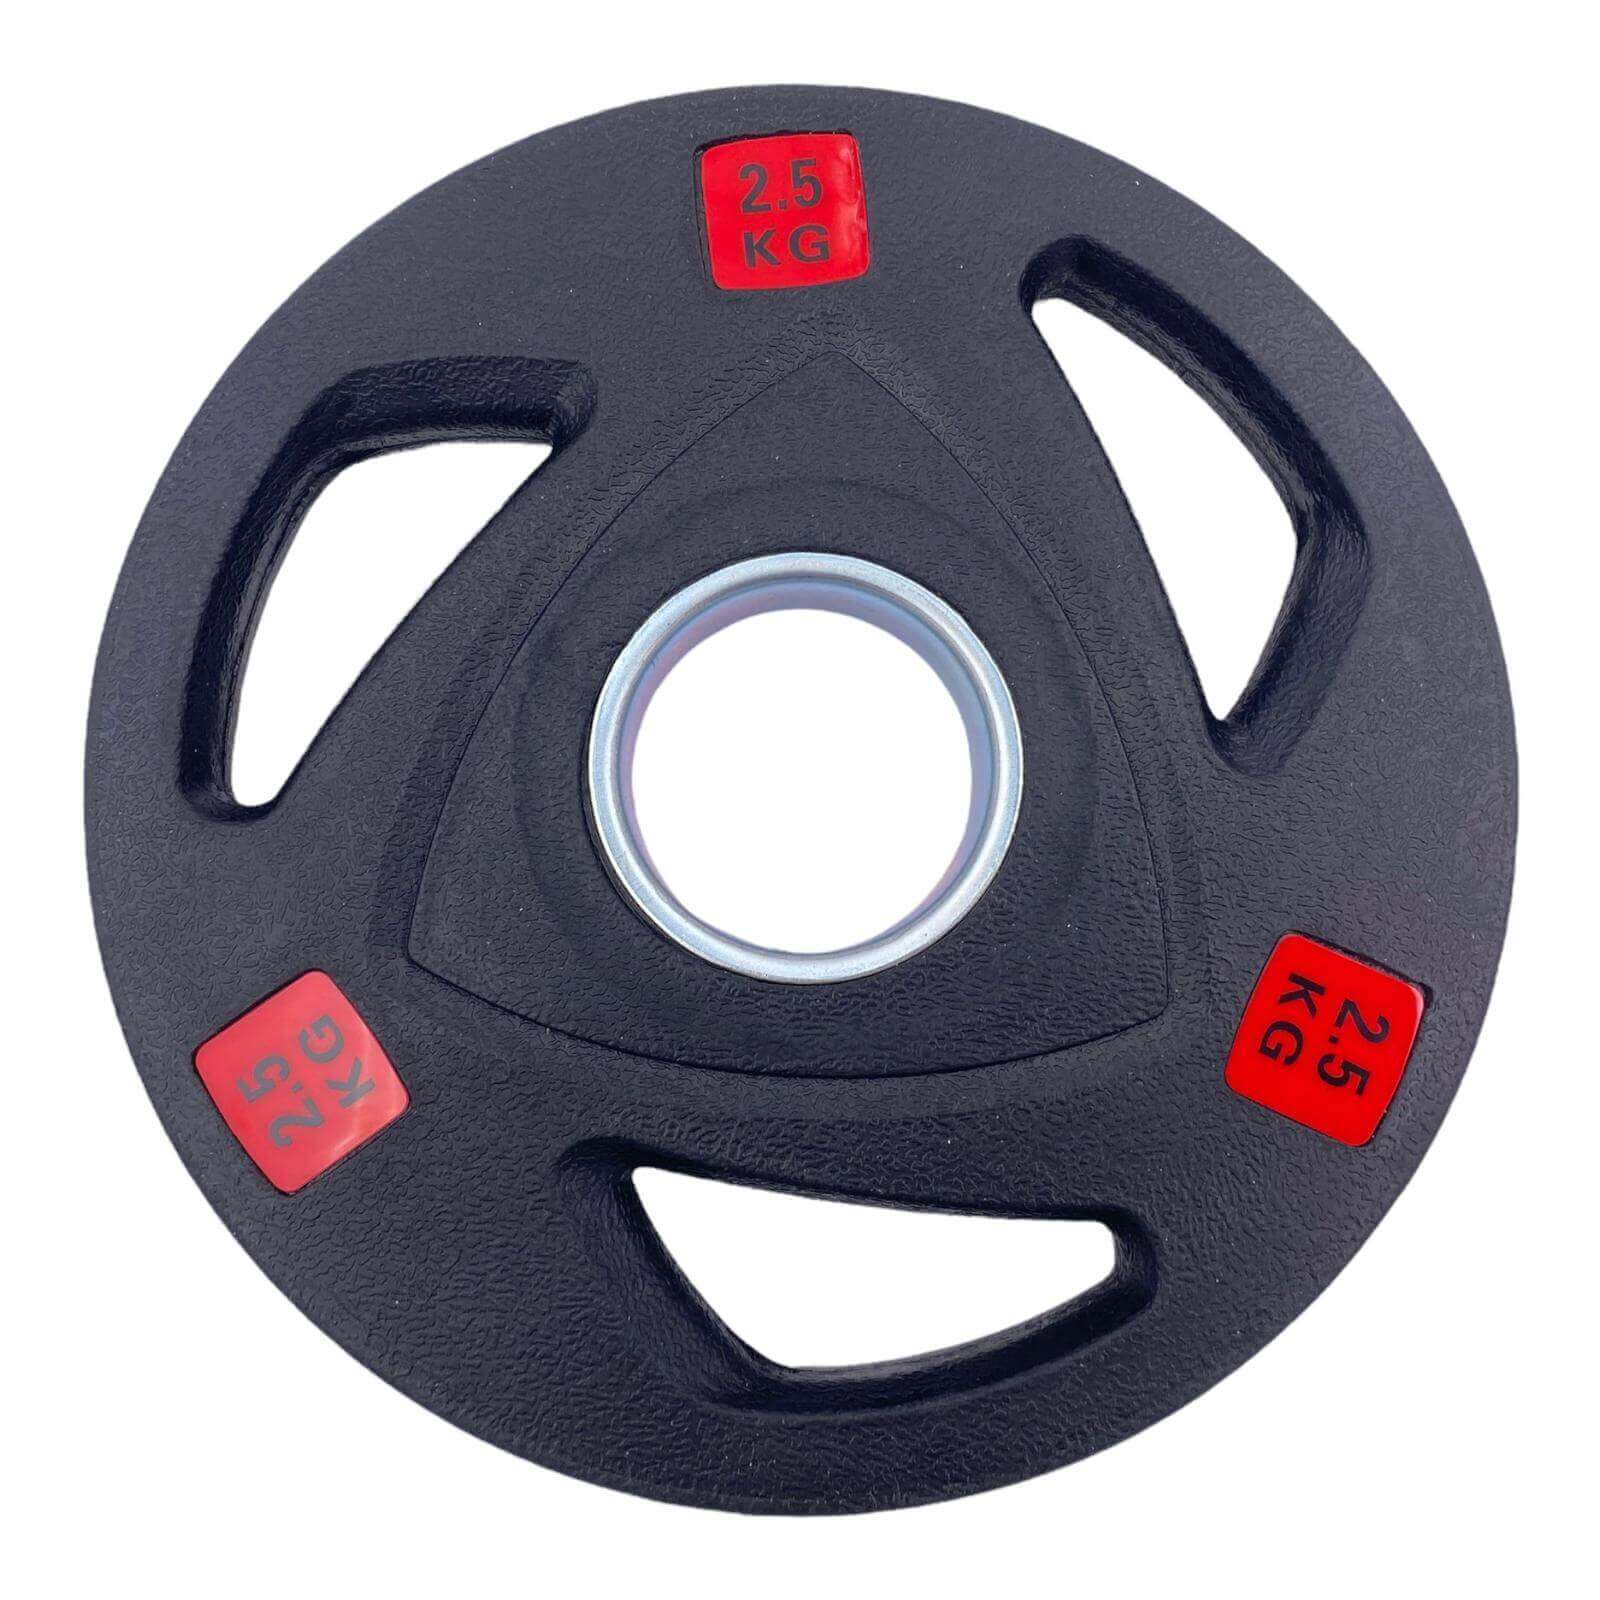 Rubber Coated Tri-grip Weight Plates Type-A (Pairs) - 2.5kg | Tri Grip Rubber Plates | INSOURCE